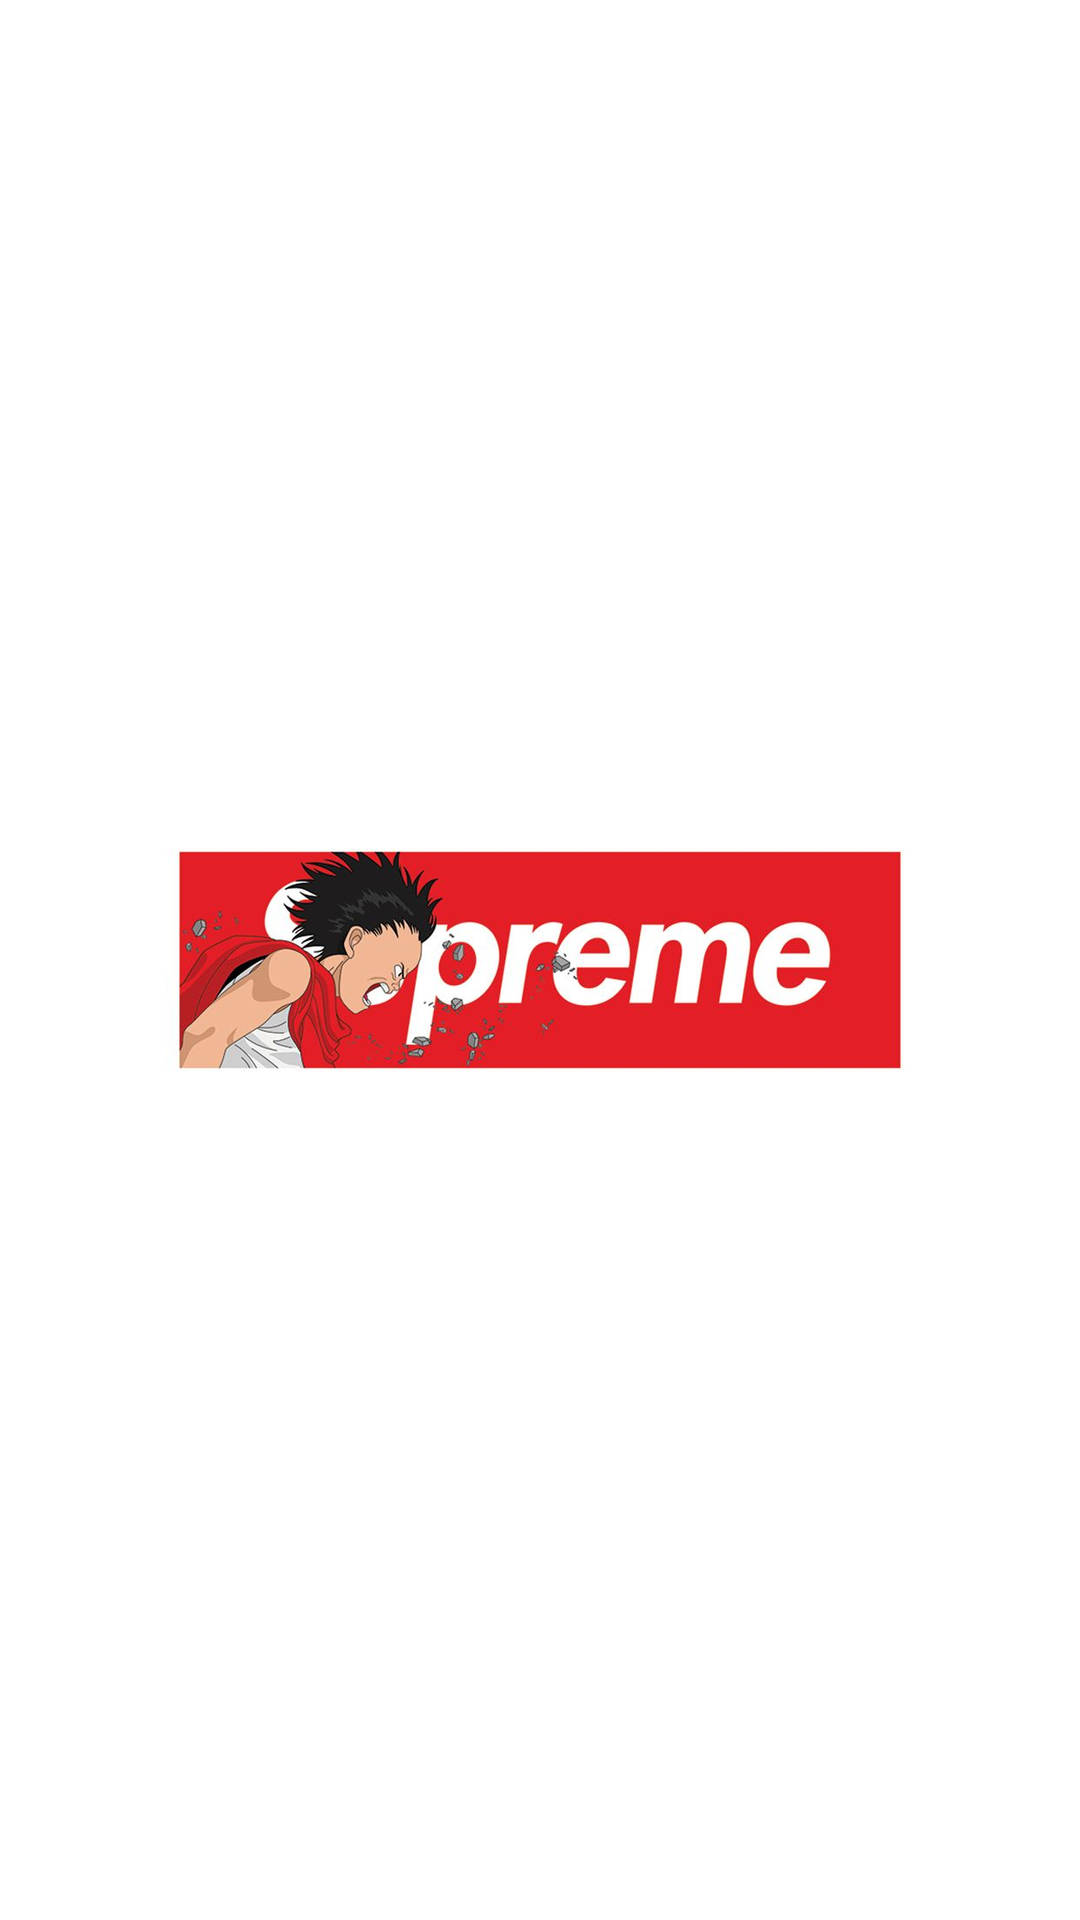 Supreme 1242X2208 Wallpaper and Background Image